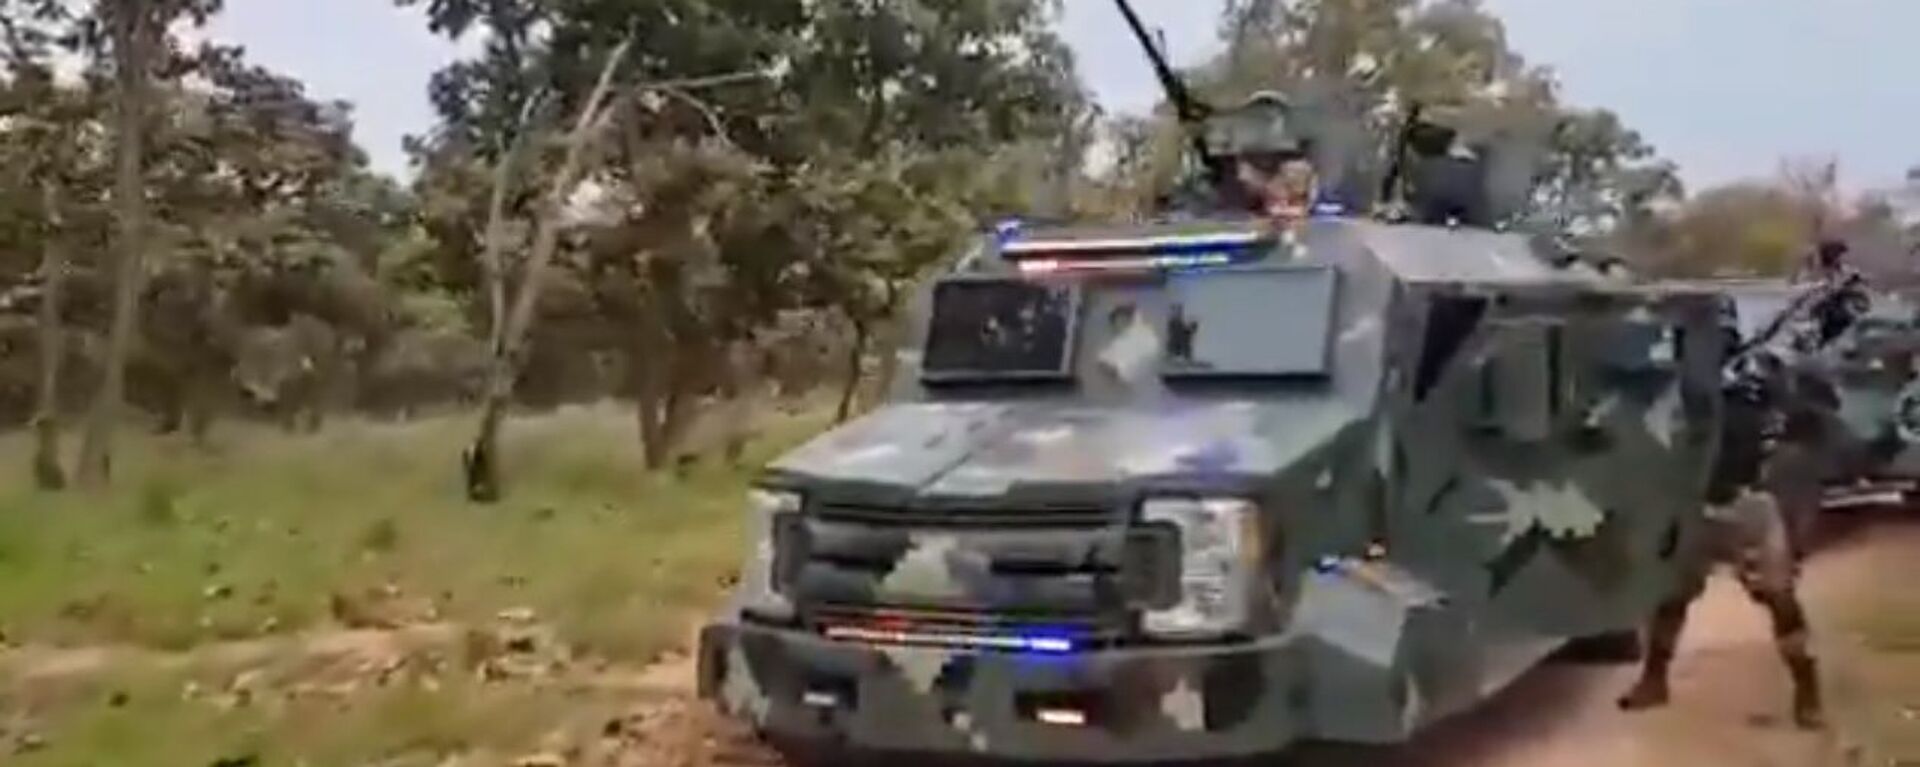 Jalisco New Generation Cartel (CJNG) allegedly shows off its military-grade equipment in a video distributed online - Sputnik International, 1920, 18.07.2020